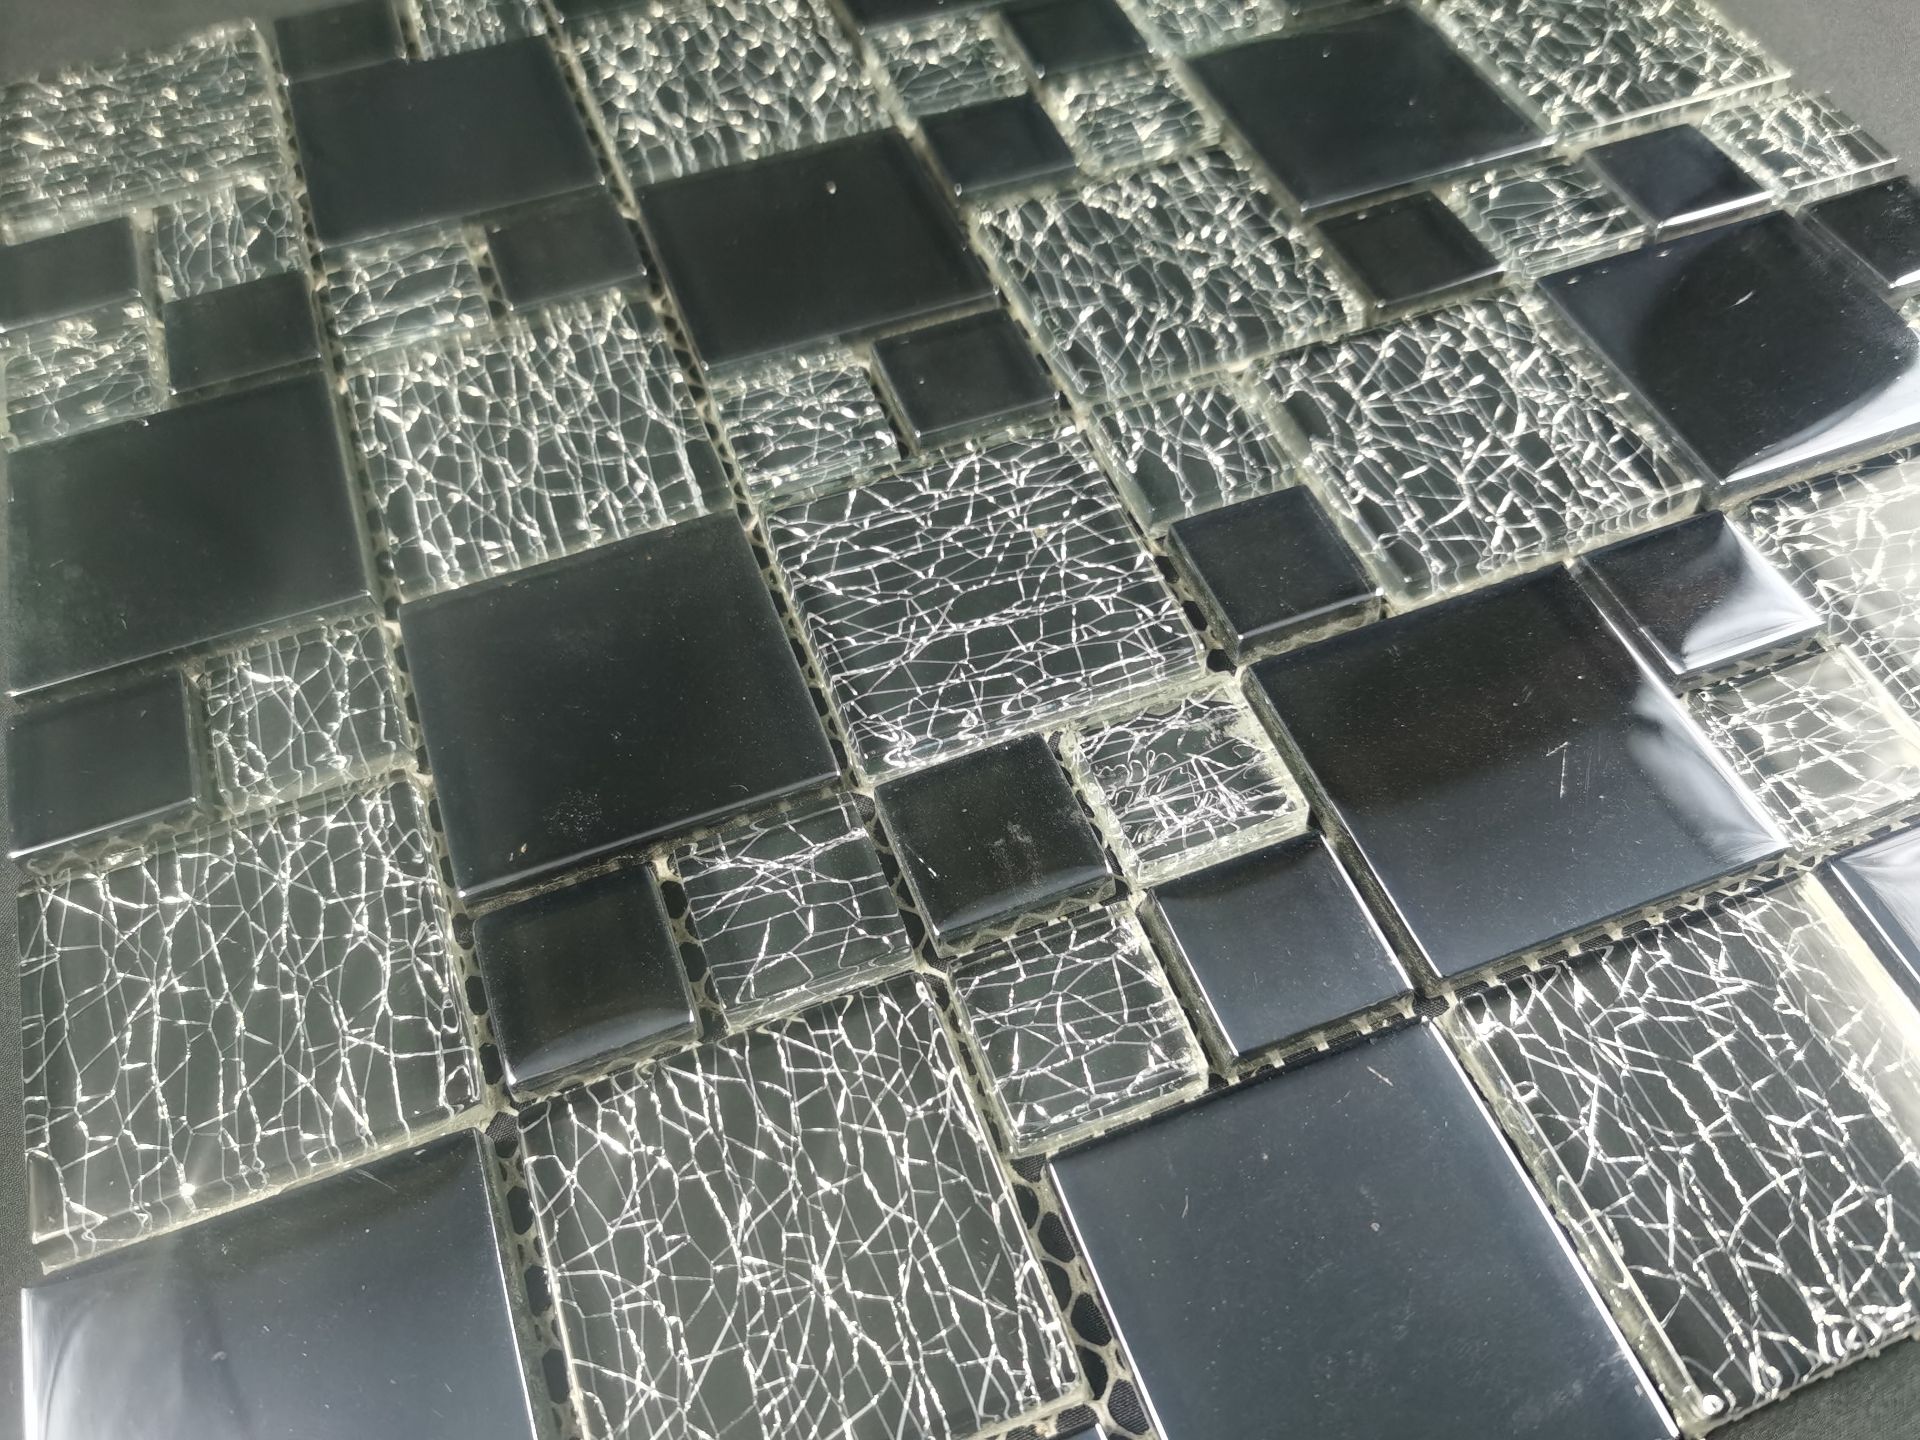 2 Square Metres - High Quality Glass/Stainless Steel Mosaic Tiles-22 Sheets - Image 5 of 5